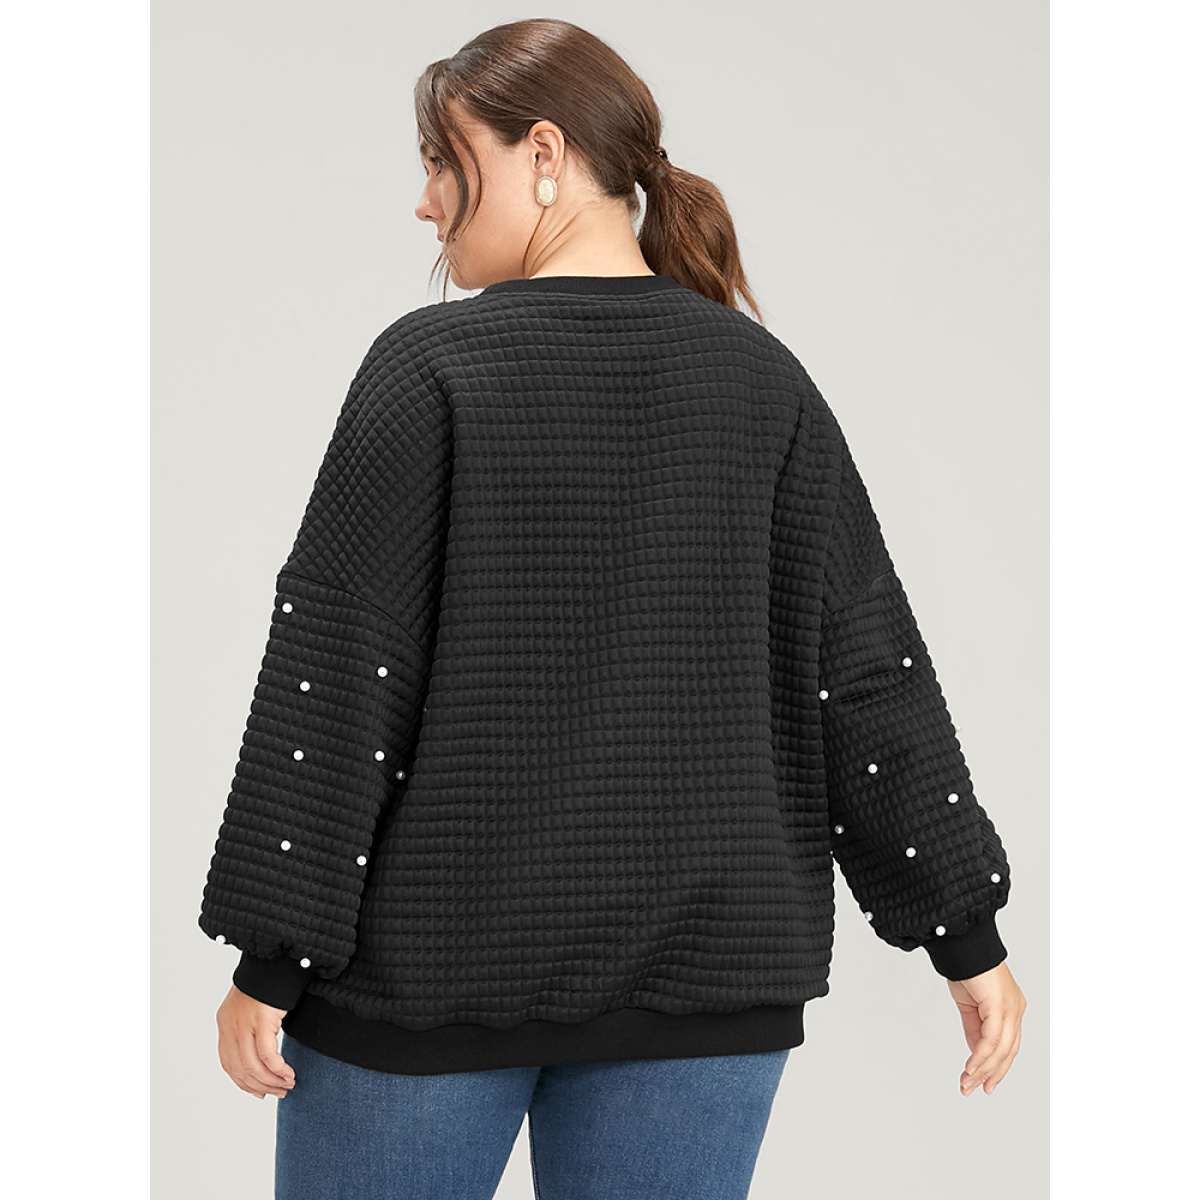 

Plus Size Solid Texture Pearls Beaded Sweatshirt Women Black Party Beaded Round Neck Going out Sweatshirts BloomChic